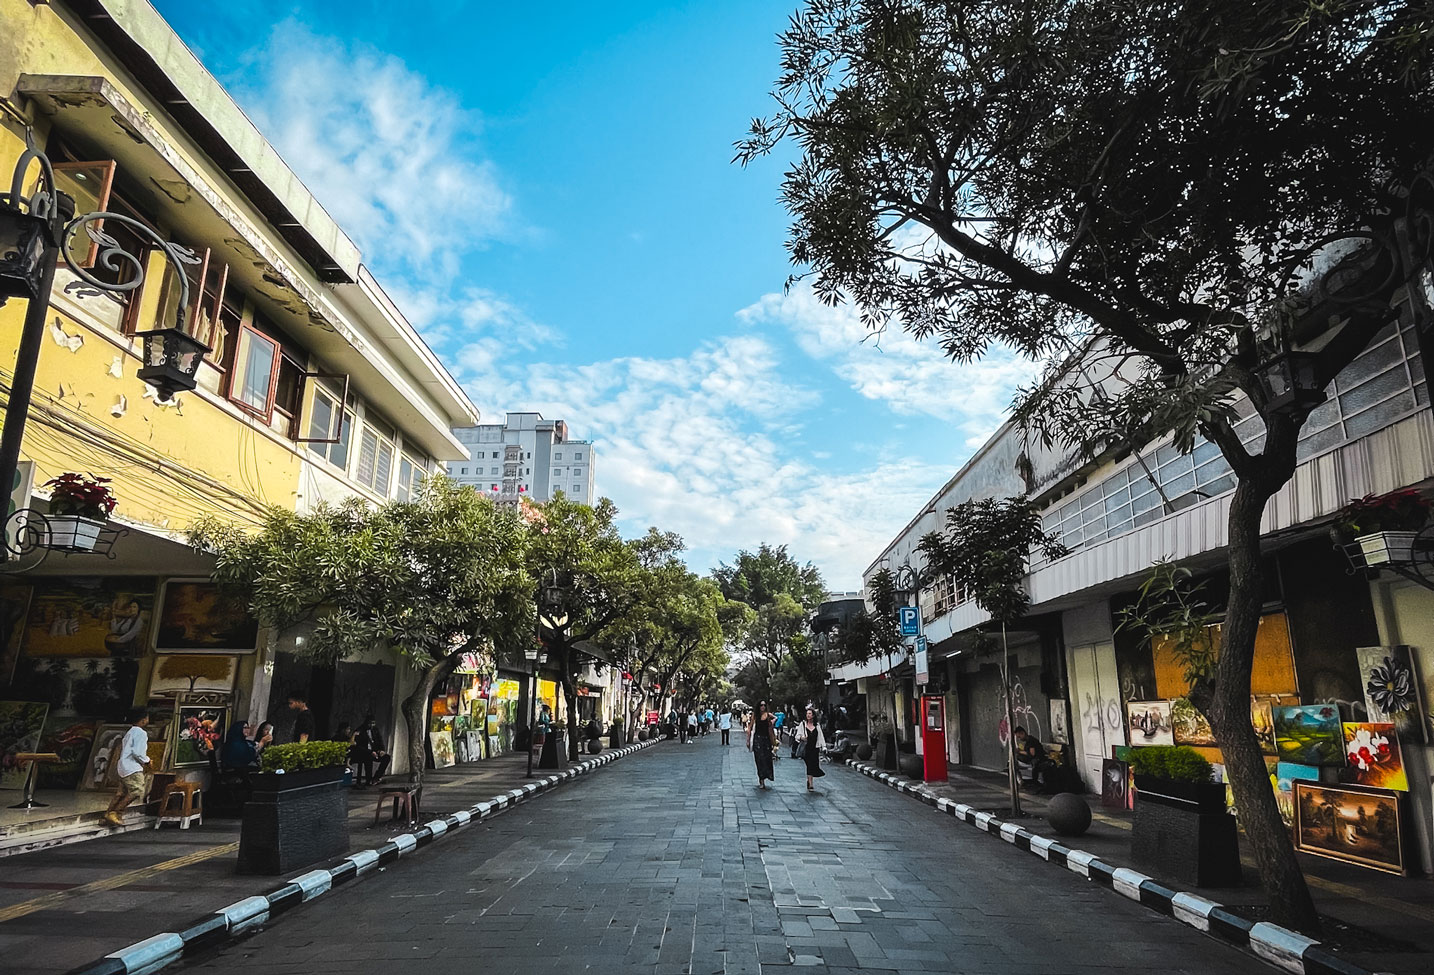 Must-Visit Historical Places in Bandung